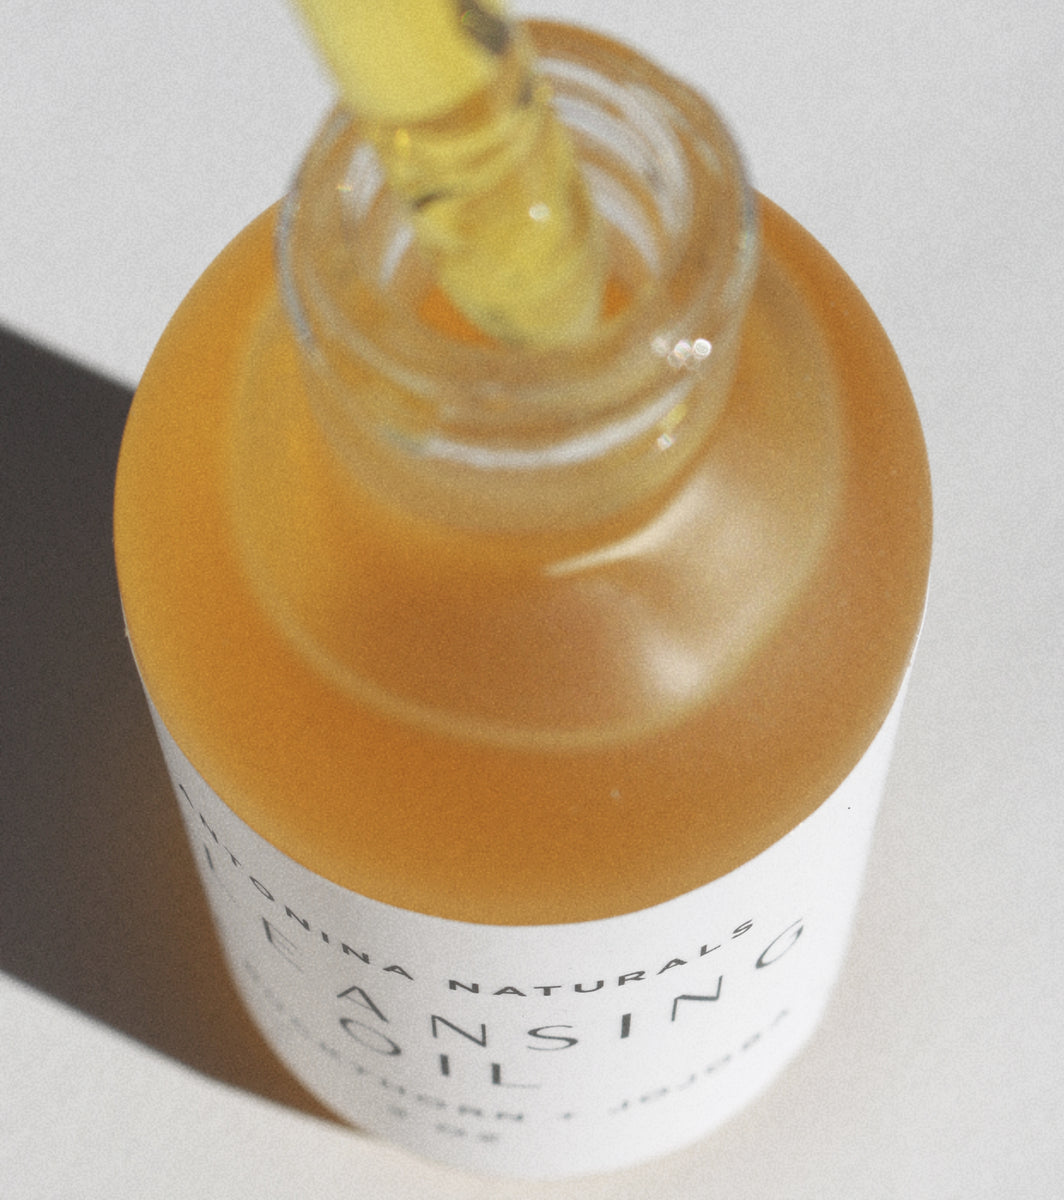 Cold pressed and locally made Cleansing Oil with a beautiful deep yellow color.